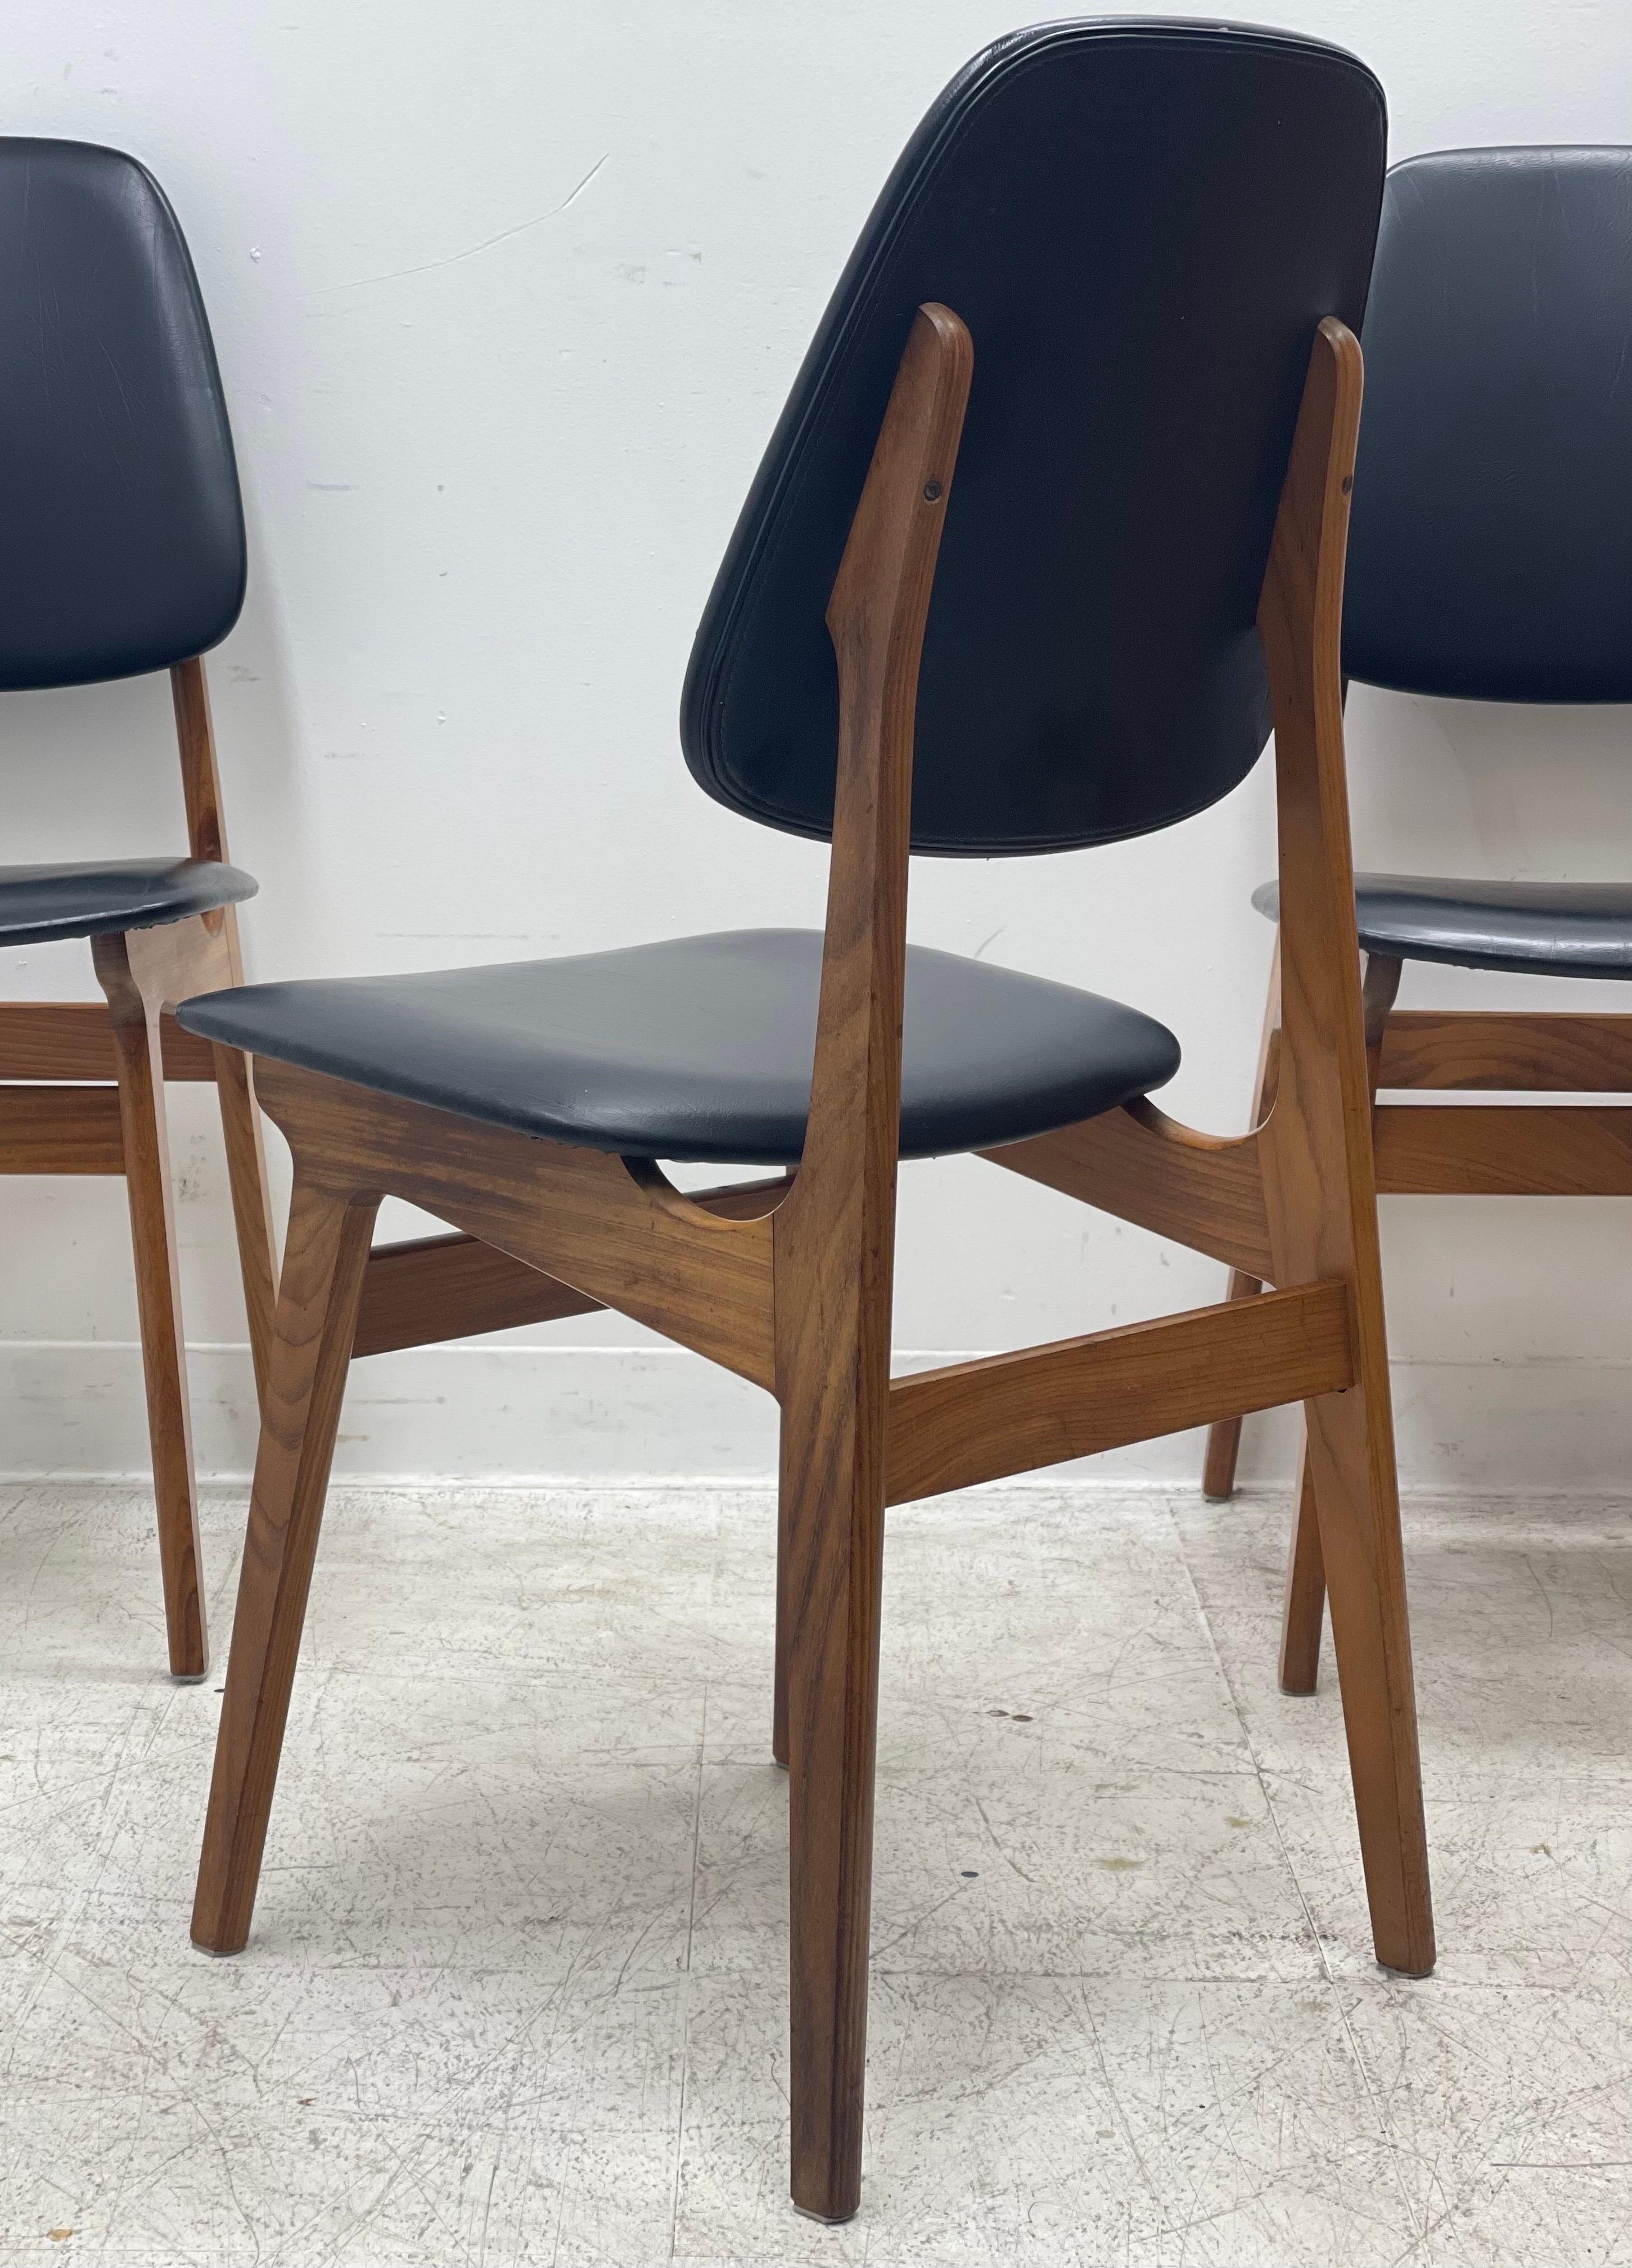 Vintage Danish Modern Chairs Set of 4 For Sale 1